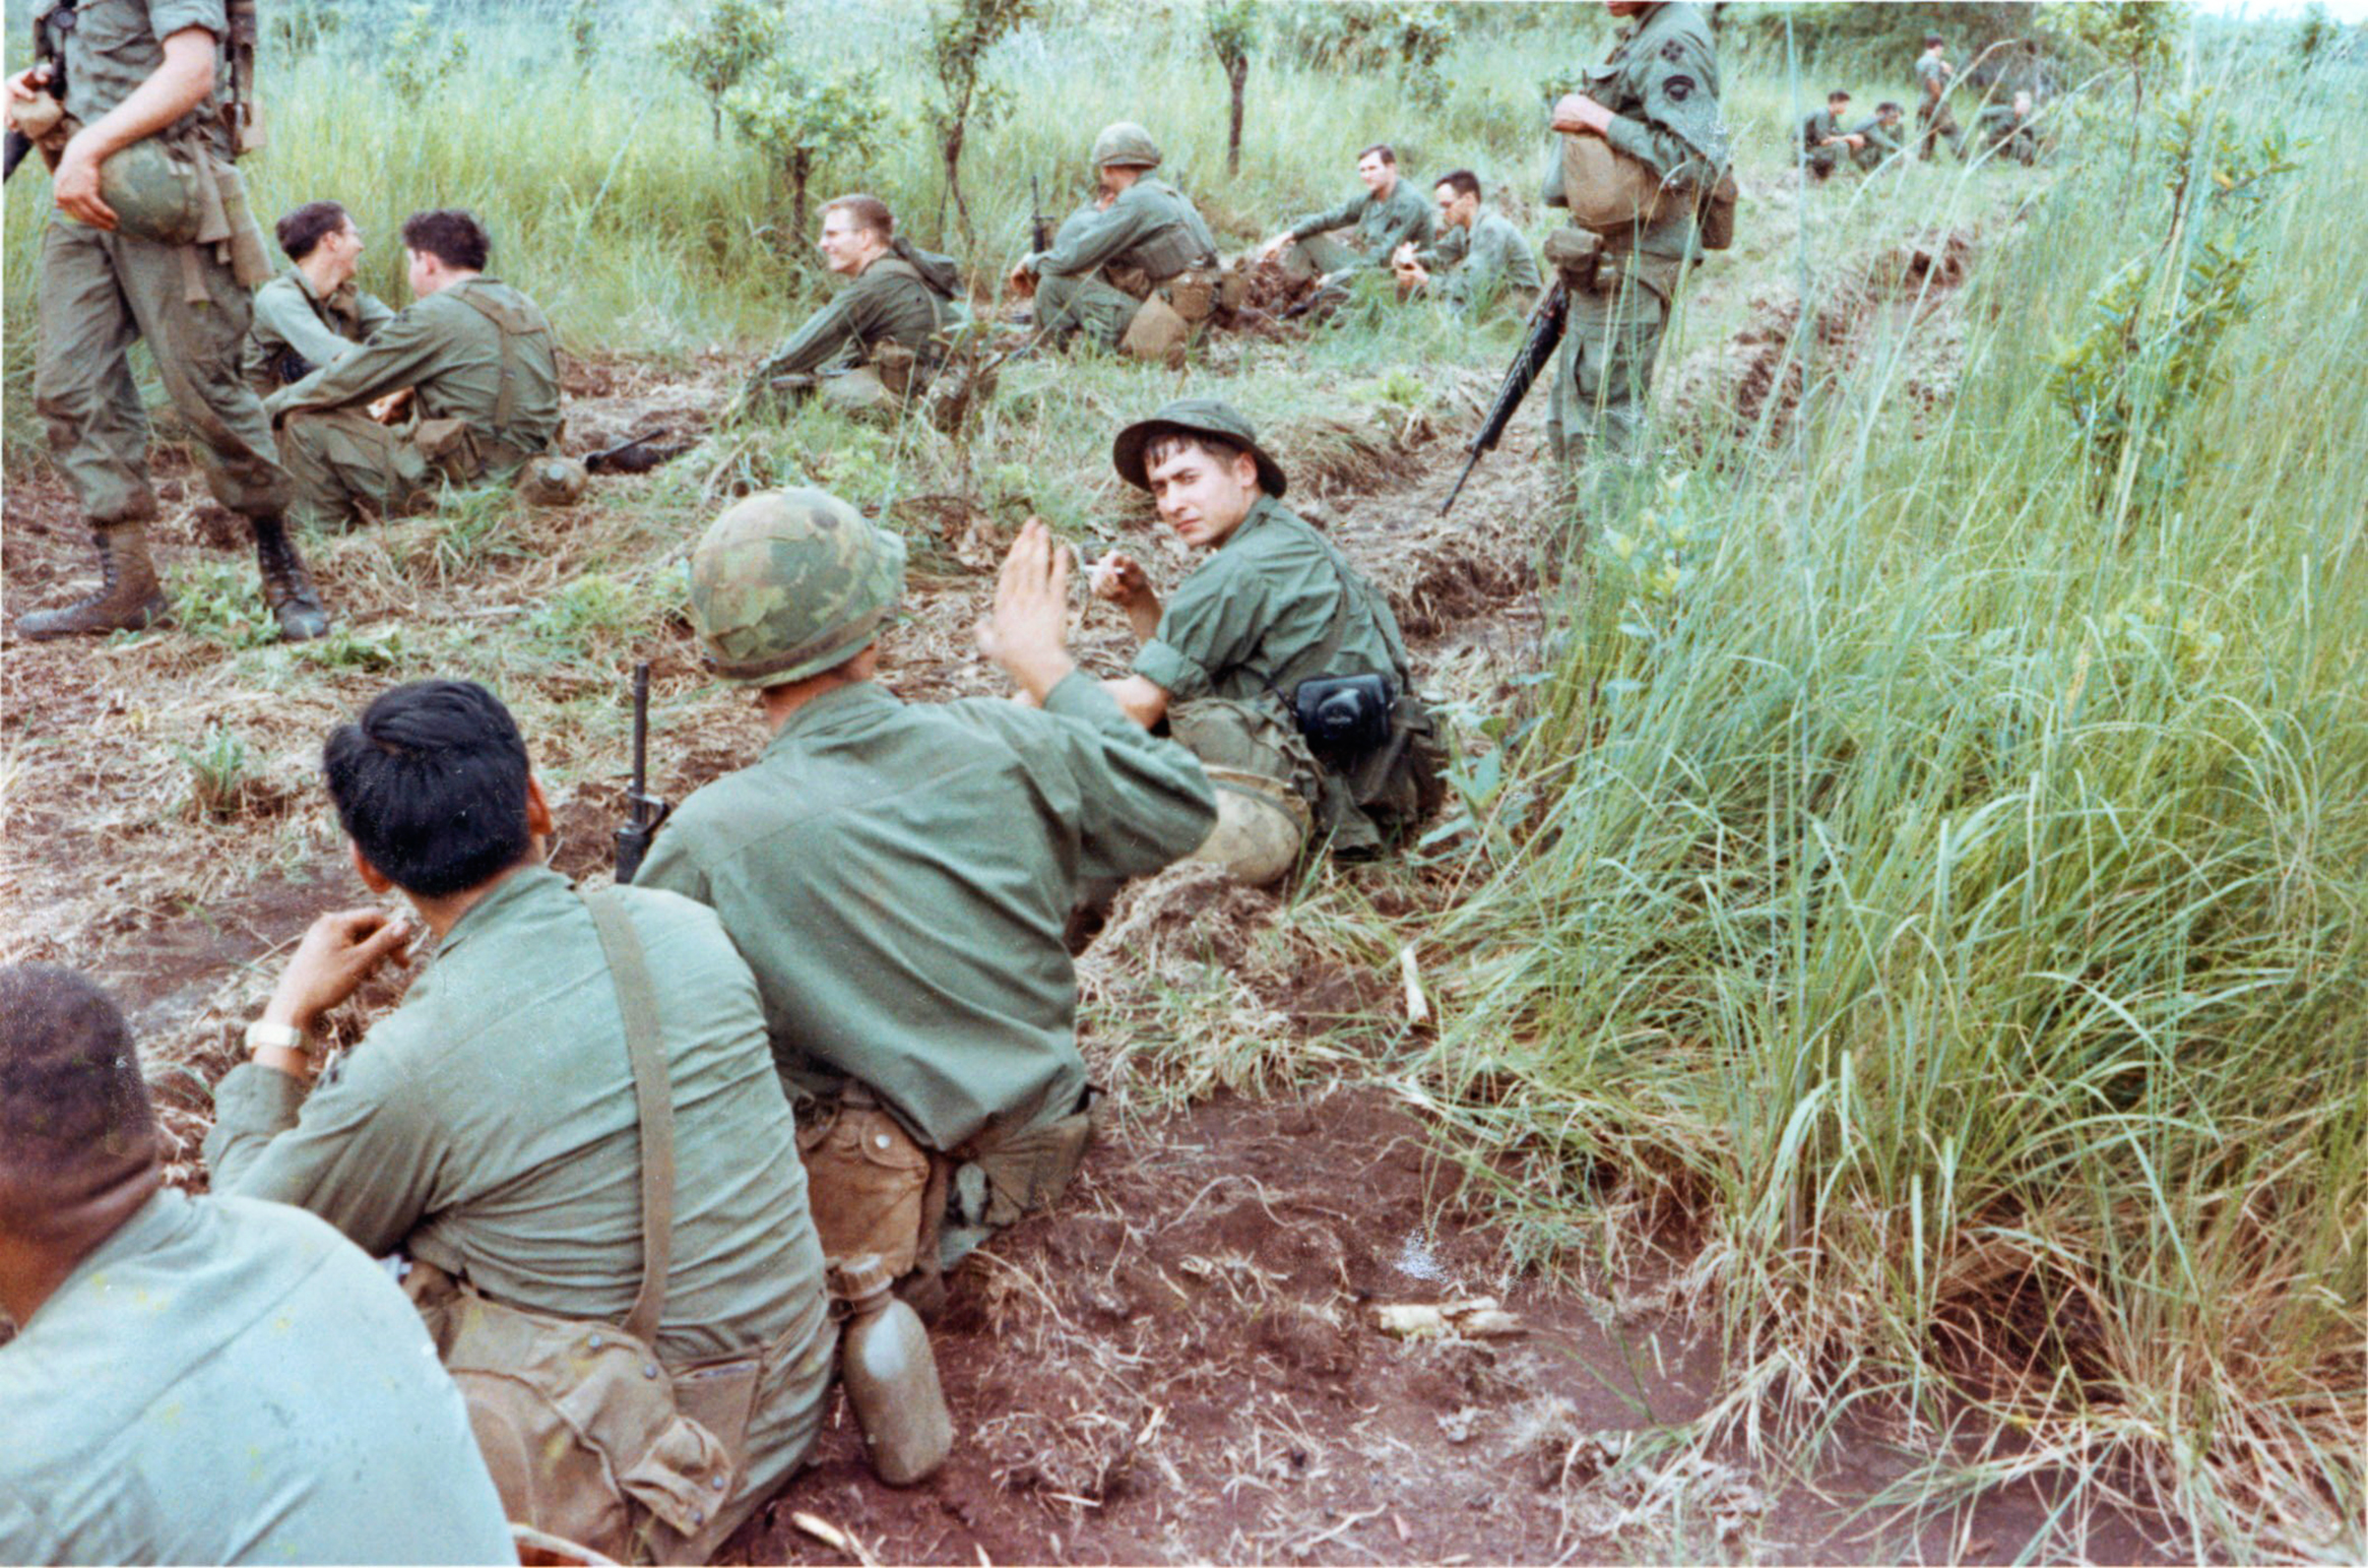 Jere Meacham on patrol in Vietnam with other members of the U.S. Army’s Fourth Infantry Division. He sent the images to his son in 1999 (Courtesy Jon Meacham)